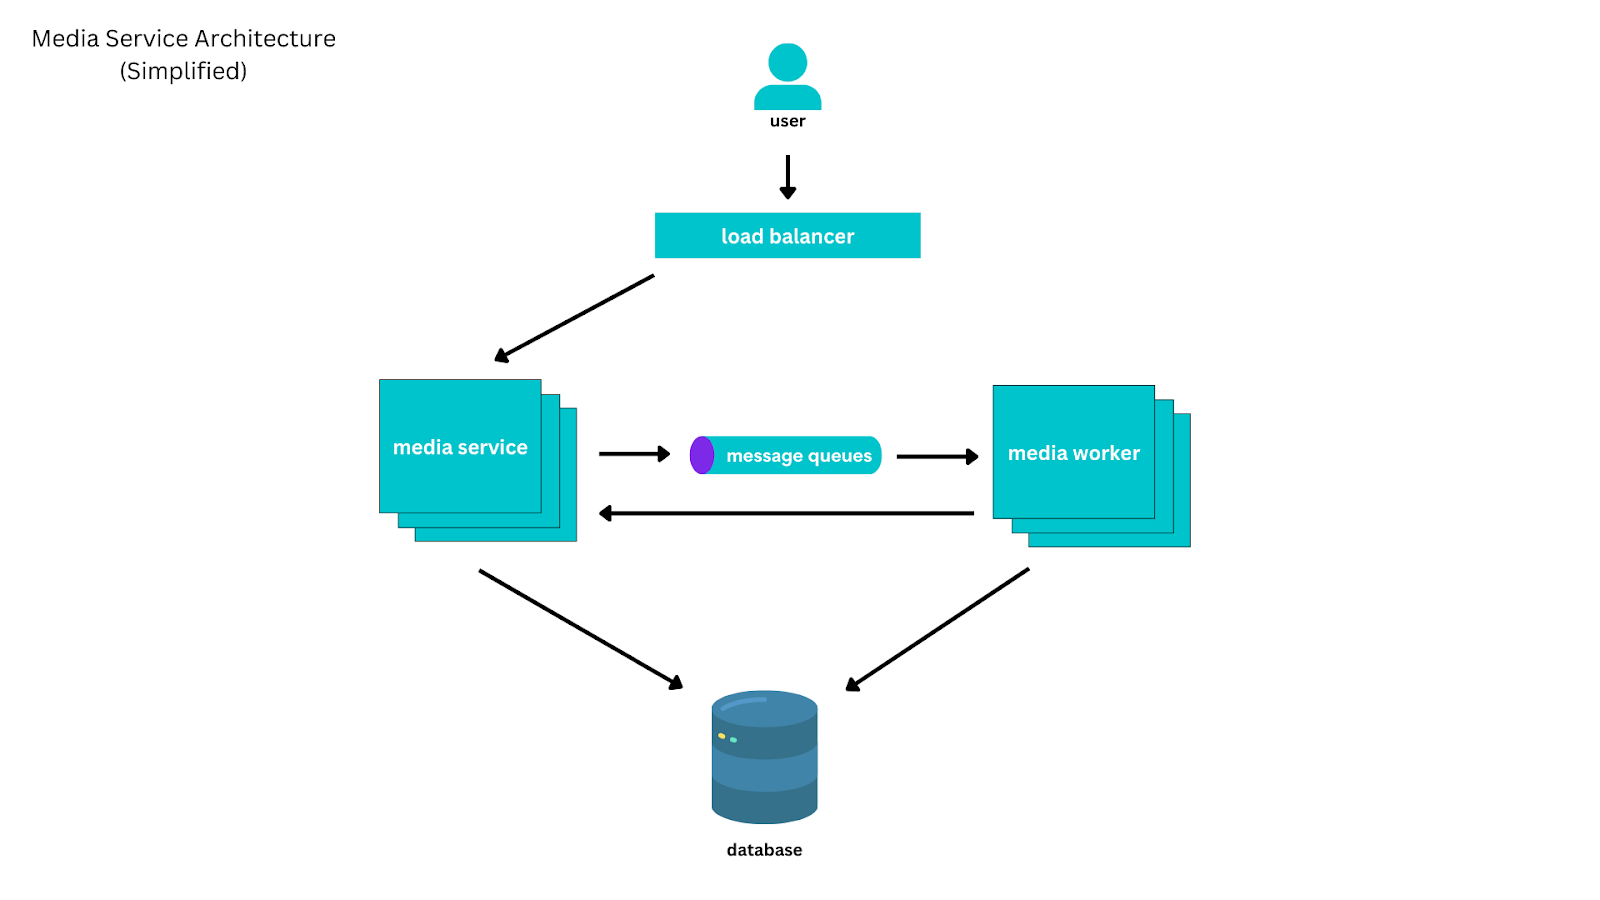 A simplified architecture overview of the Media Service. It comprises of a user hitting a load balancer, which distributes the workload to the media service. Message queues push messages to media service workers for processing, will all events recorded on a common database.